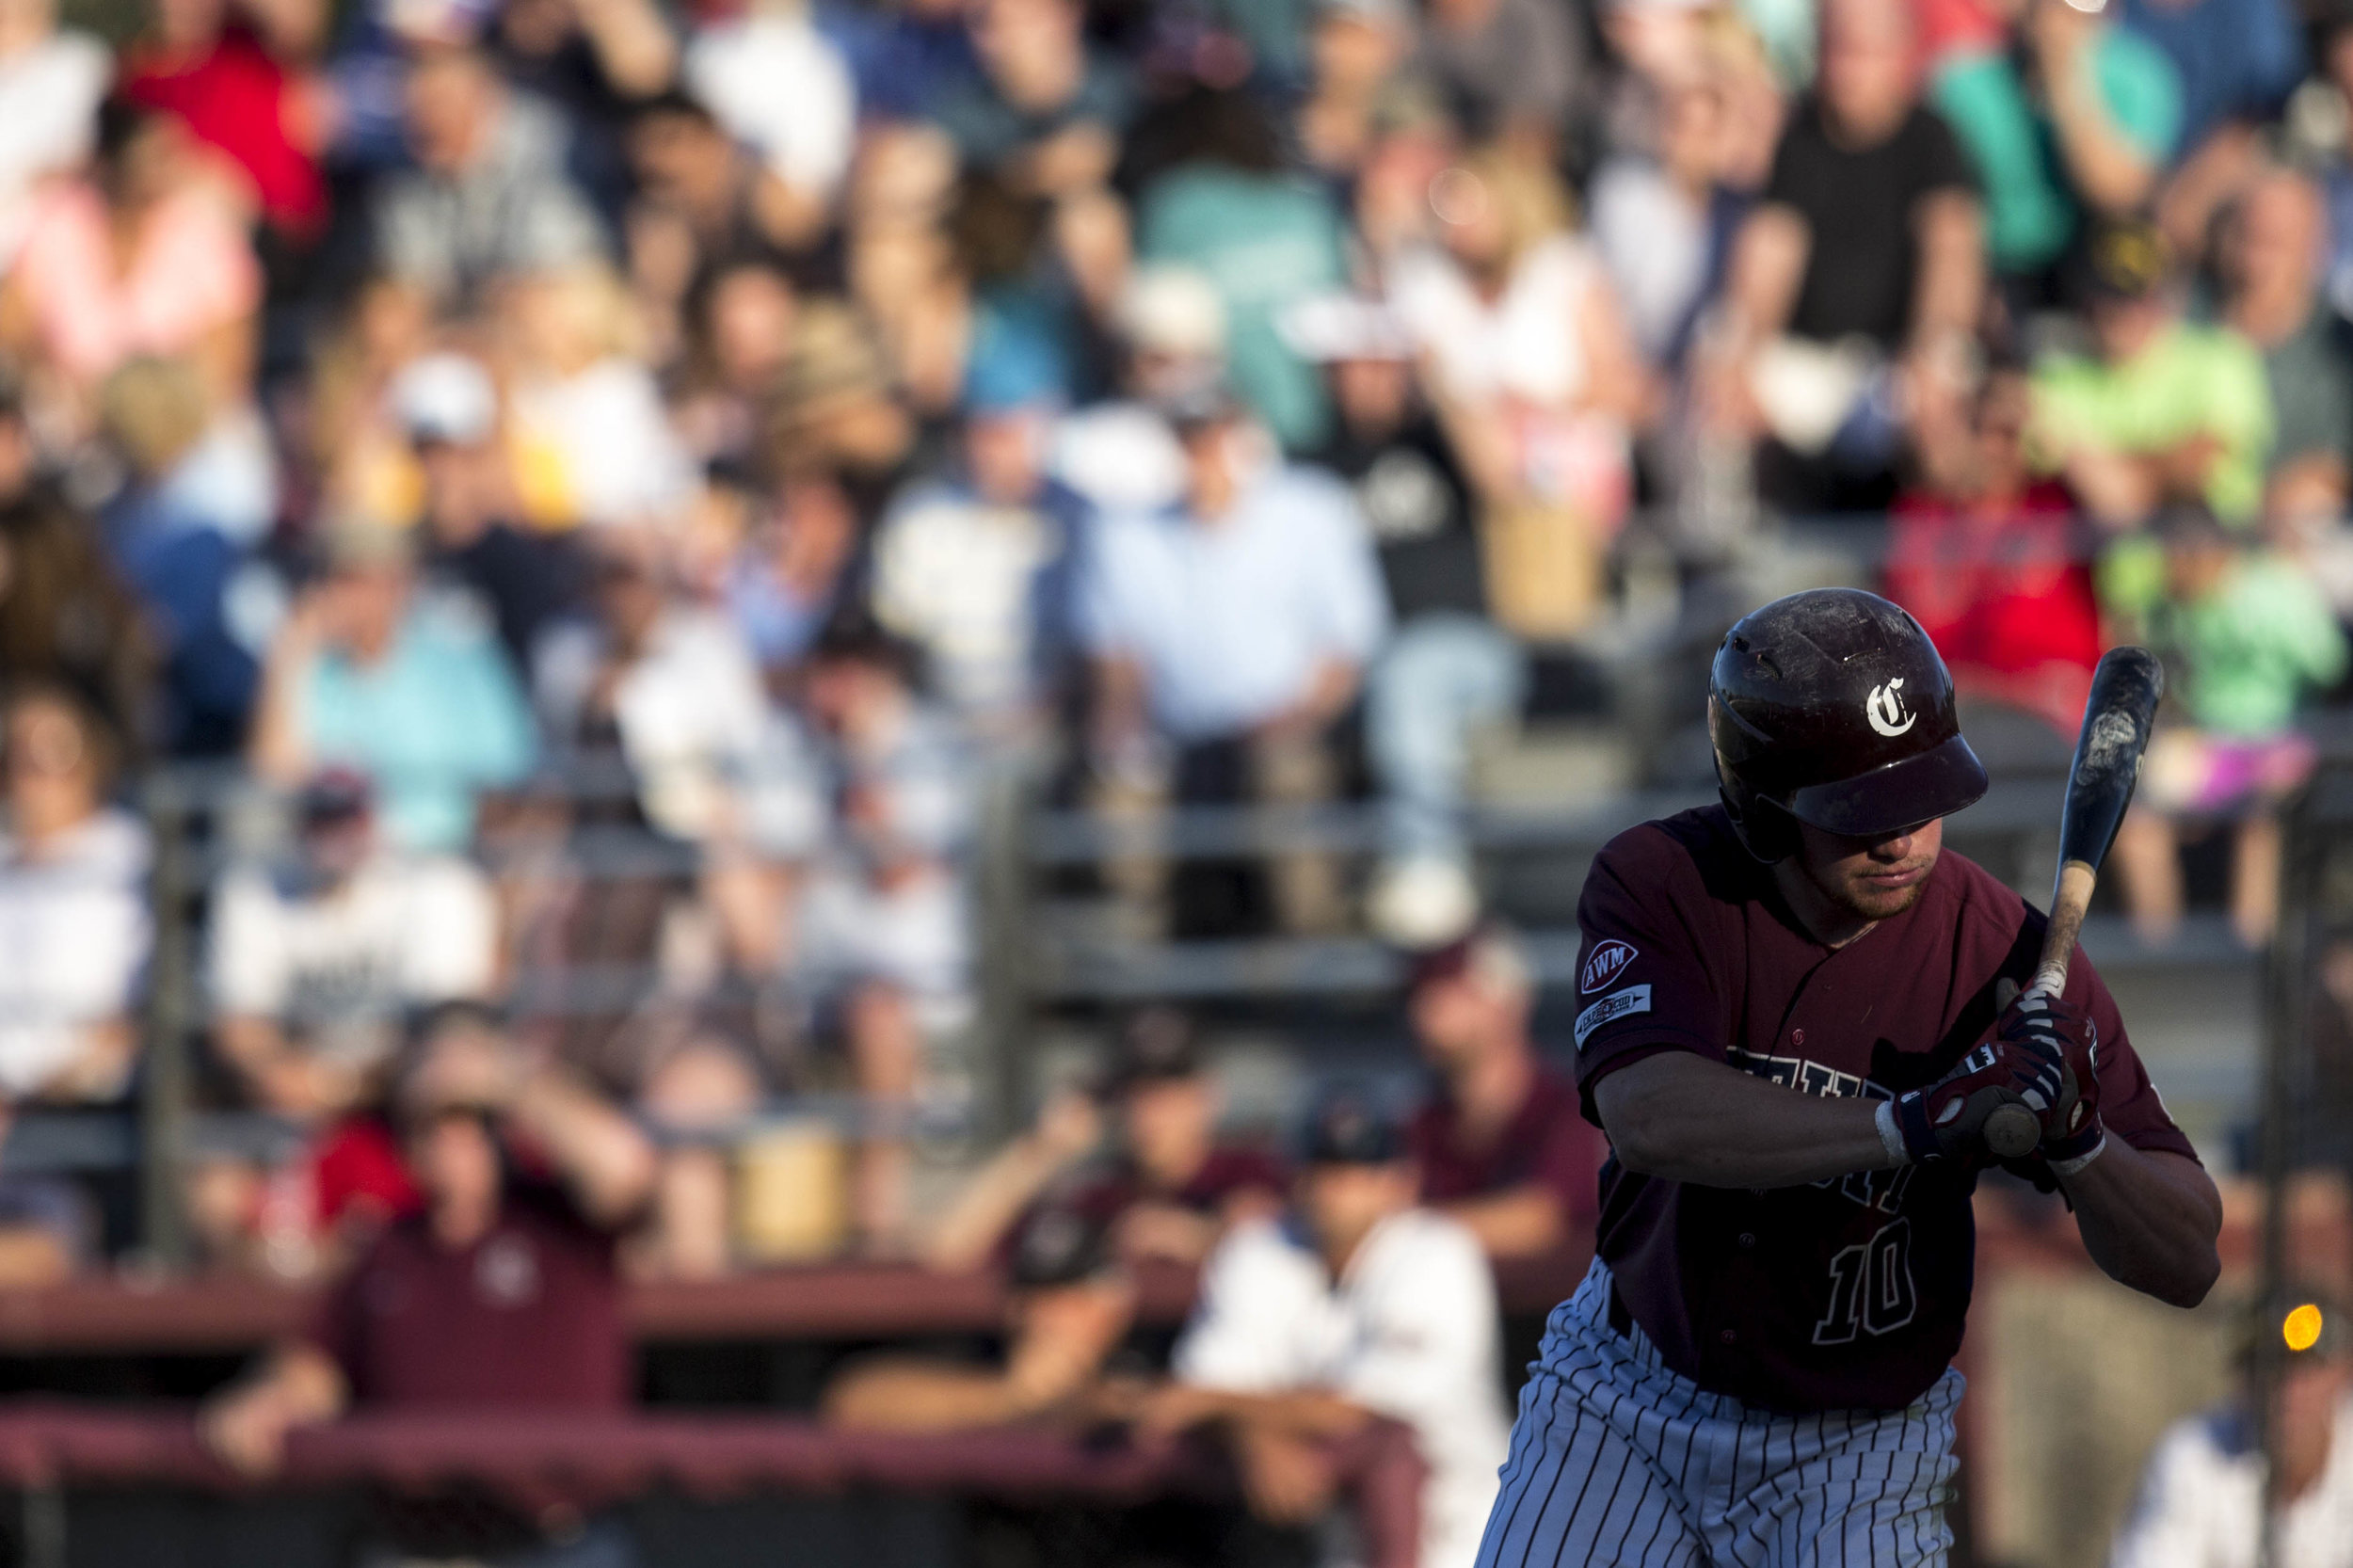  James McArthur pitches to Miles Lewis who hit a single during the Falmouth Commodores home game against the Cotuit Kettleers on July 5, 2017. 